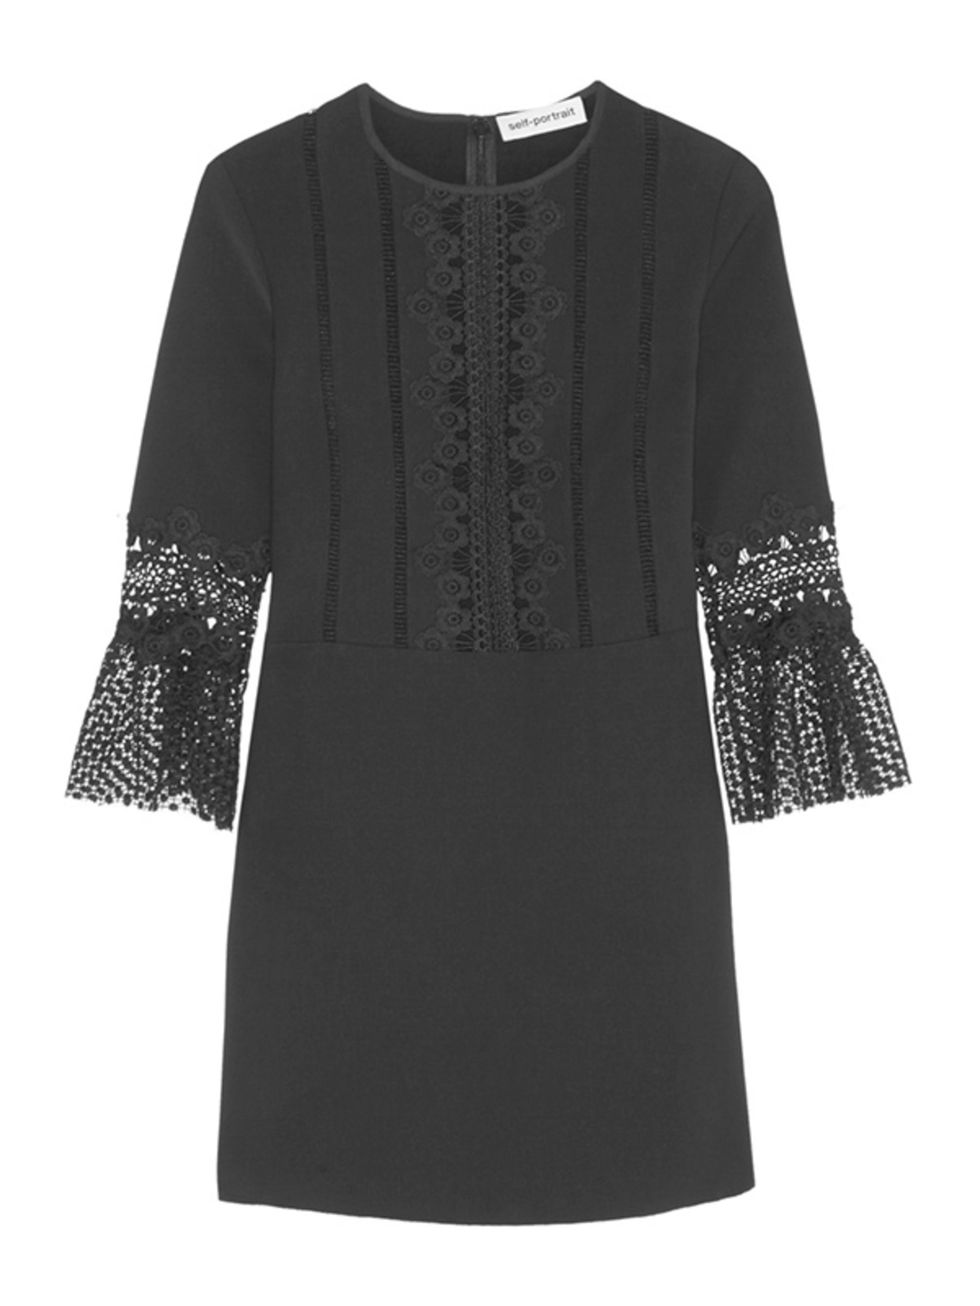 <p><a href="http://www.net-a-porter.com/gb/en/product/643197/self_portrait/guipure-lace-paneled-crepe-mini-dress" target="_blank">Self Portrait</a> dress, &pound;245 available at net-a-porter.com</p>

<p>The classic LBD is updated with a touch of lace - w